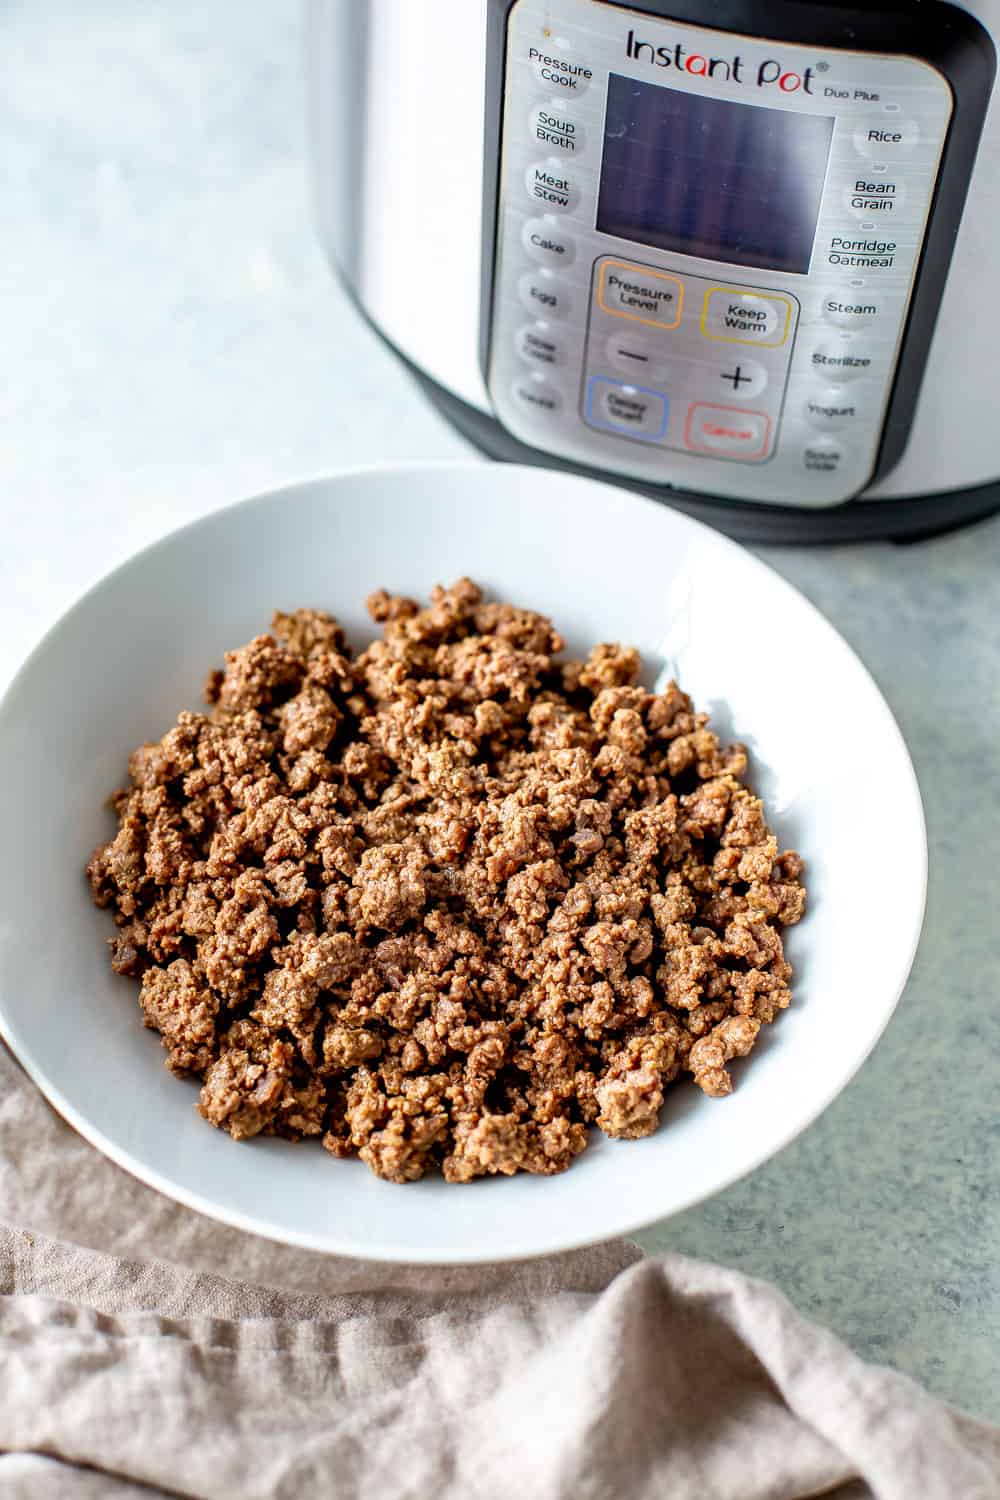 Instant Pot Ground Beef Fresh or Frozen - Eating Instantly